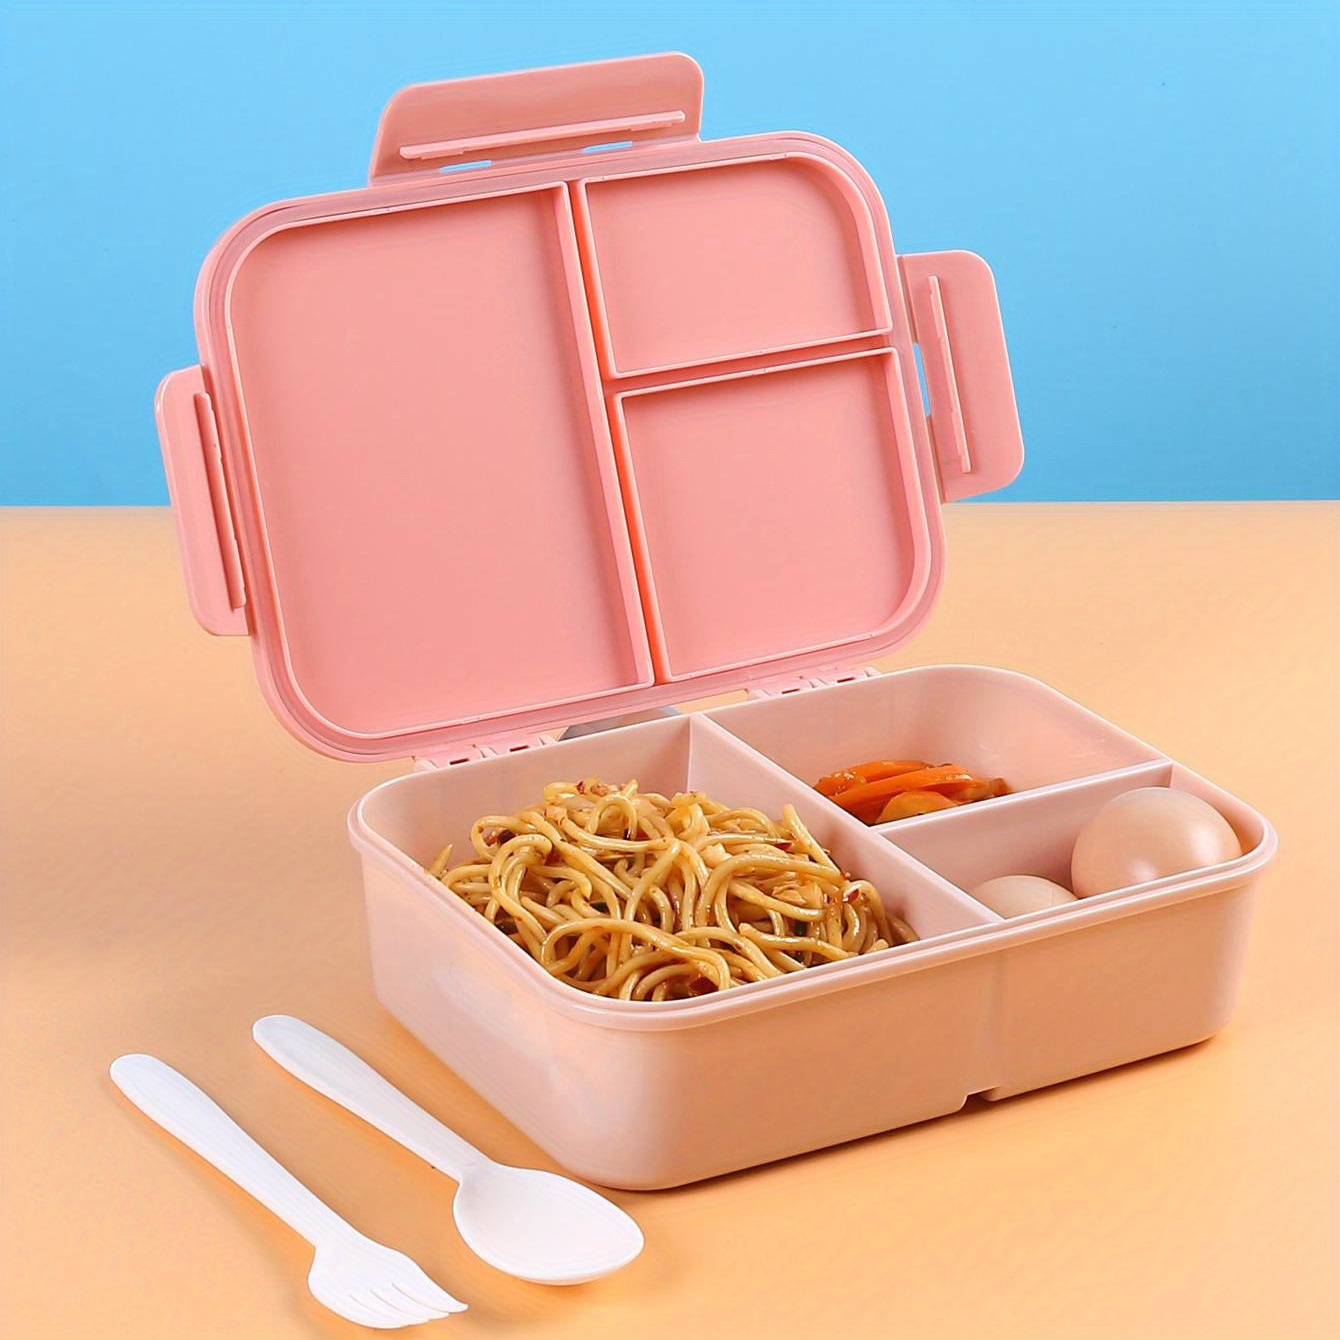 

1pc, Portable Flip Top Lunch Box With Tableware, Large Capacity Food Grade Plastic Lunch Box, Sealed Container For Travel Food, Very Suitable For Camping, Picnics, And Office Dining